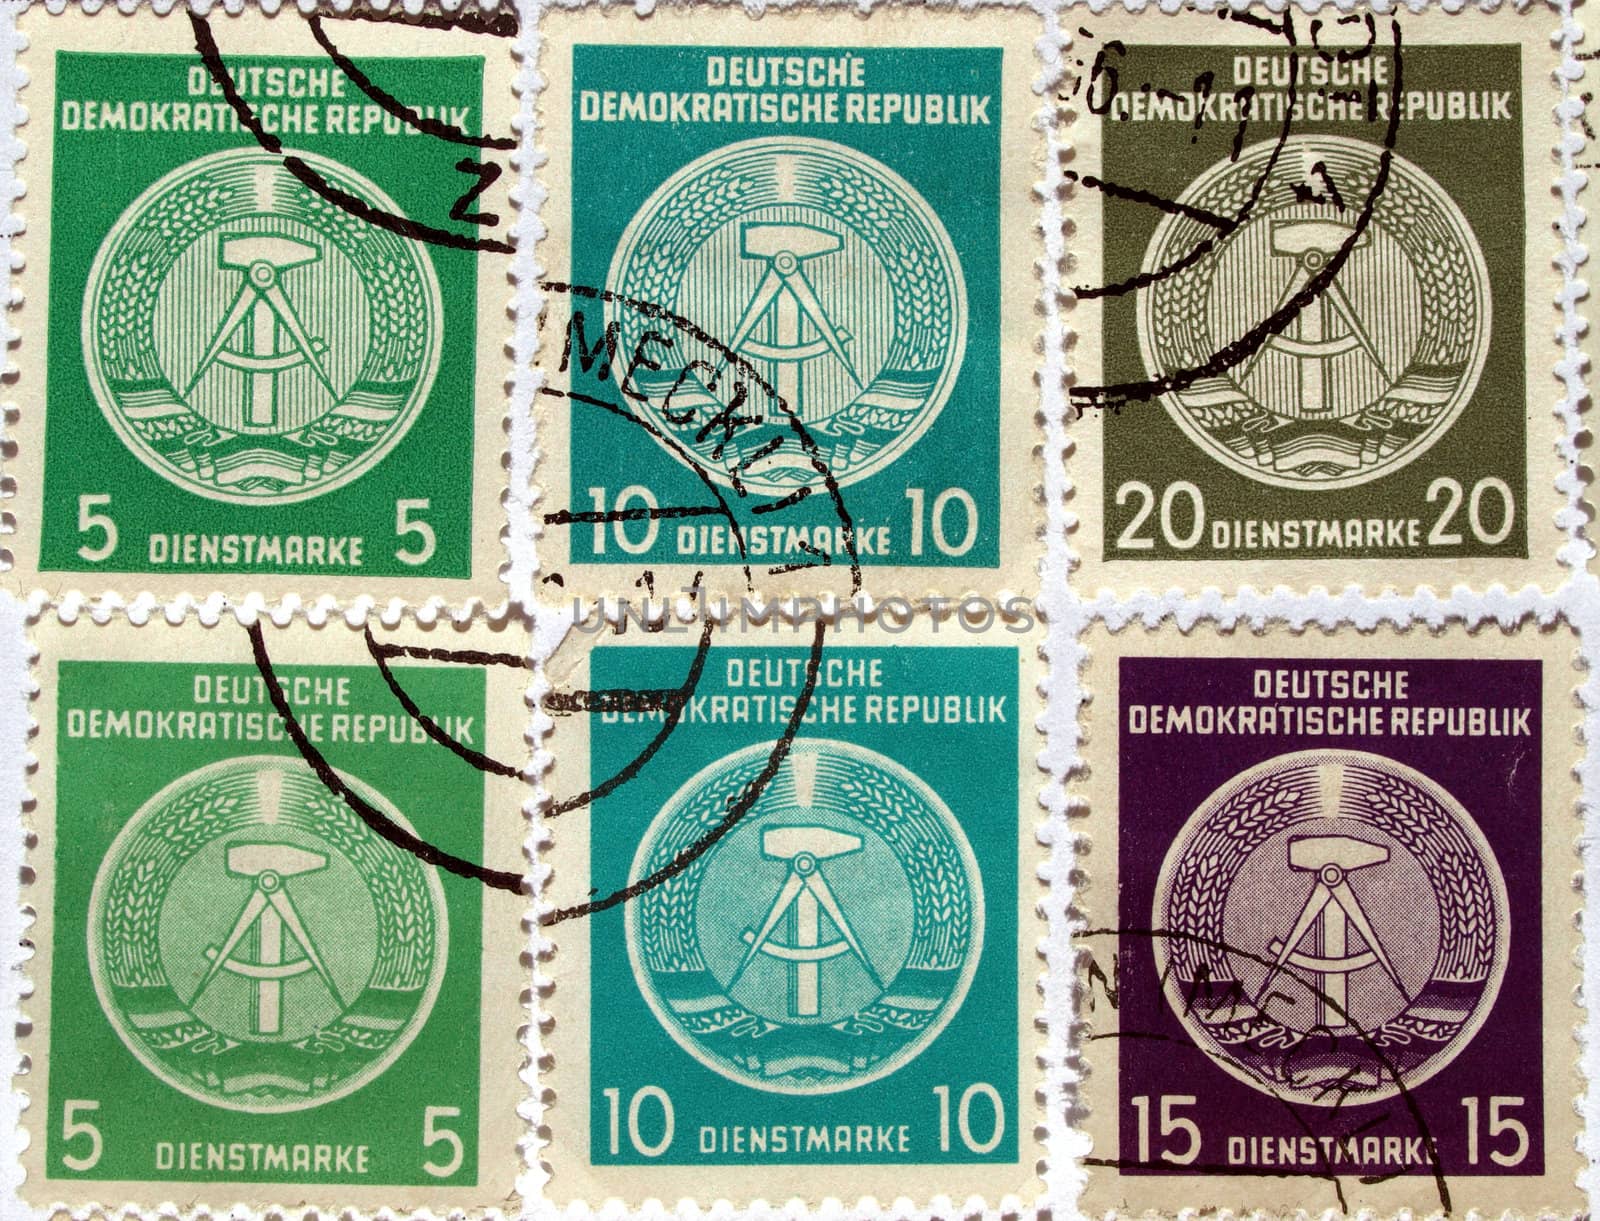 DDR stamps by claudiodivizia